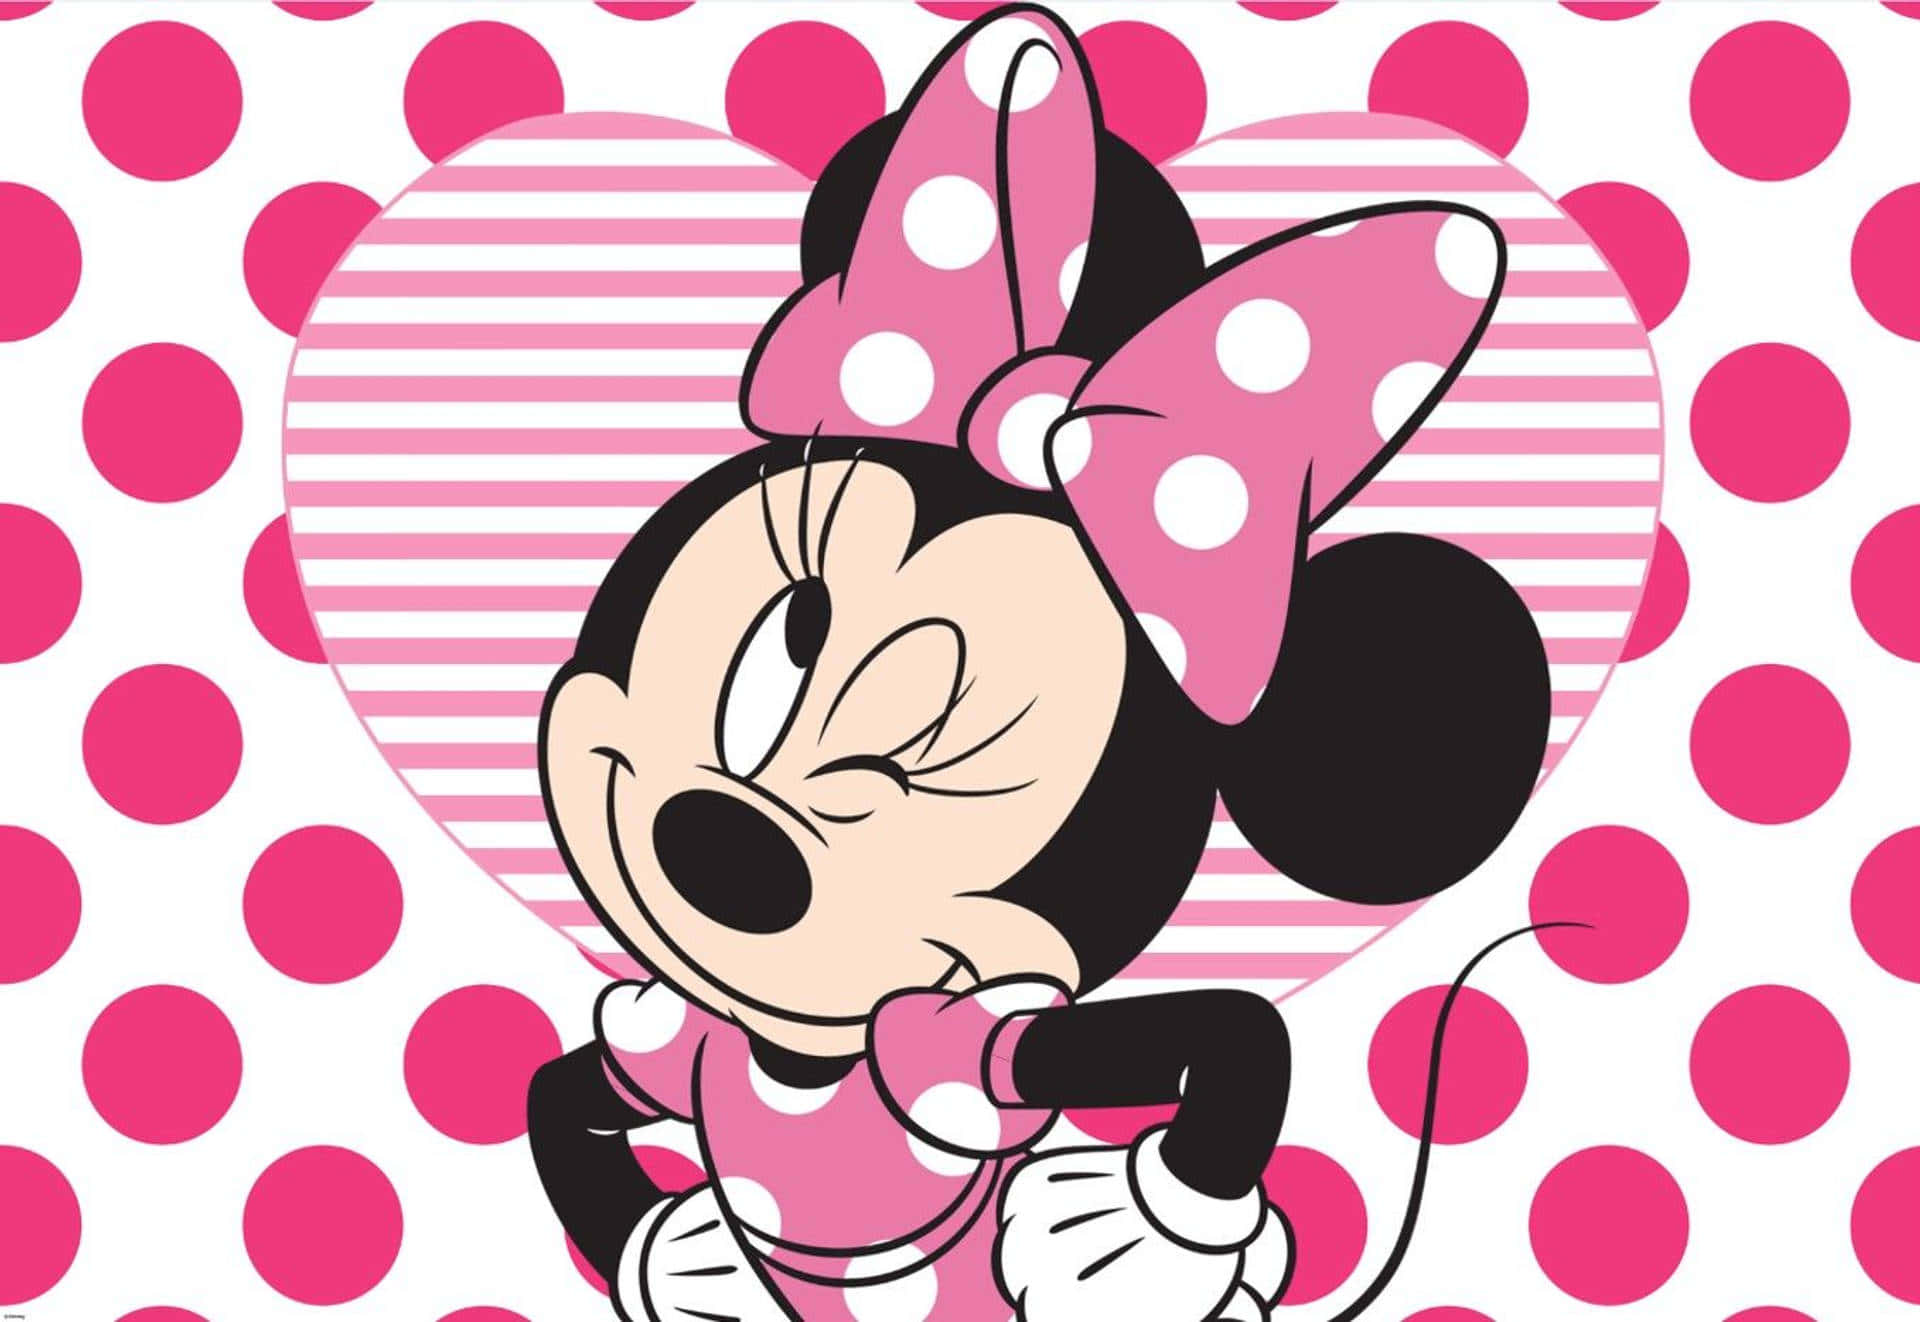 Pink Thing Of The Day: Minnie Mouse Pink Toy Phone